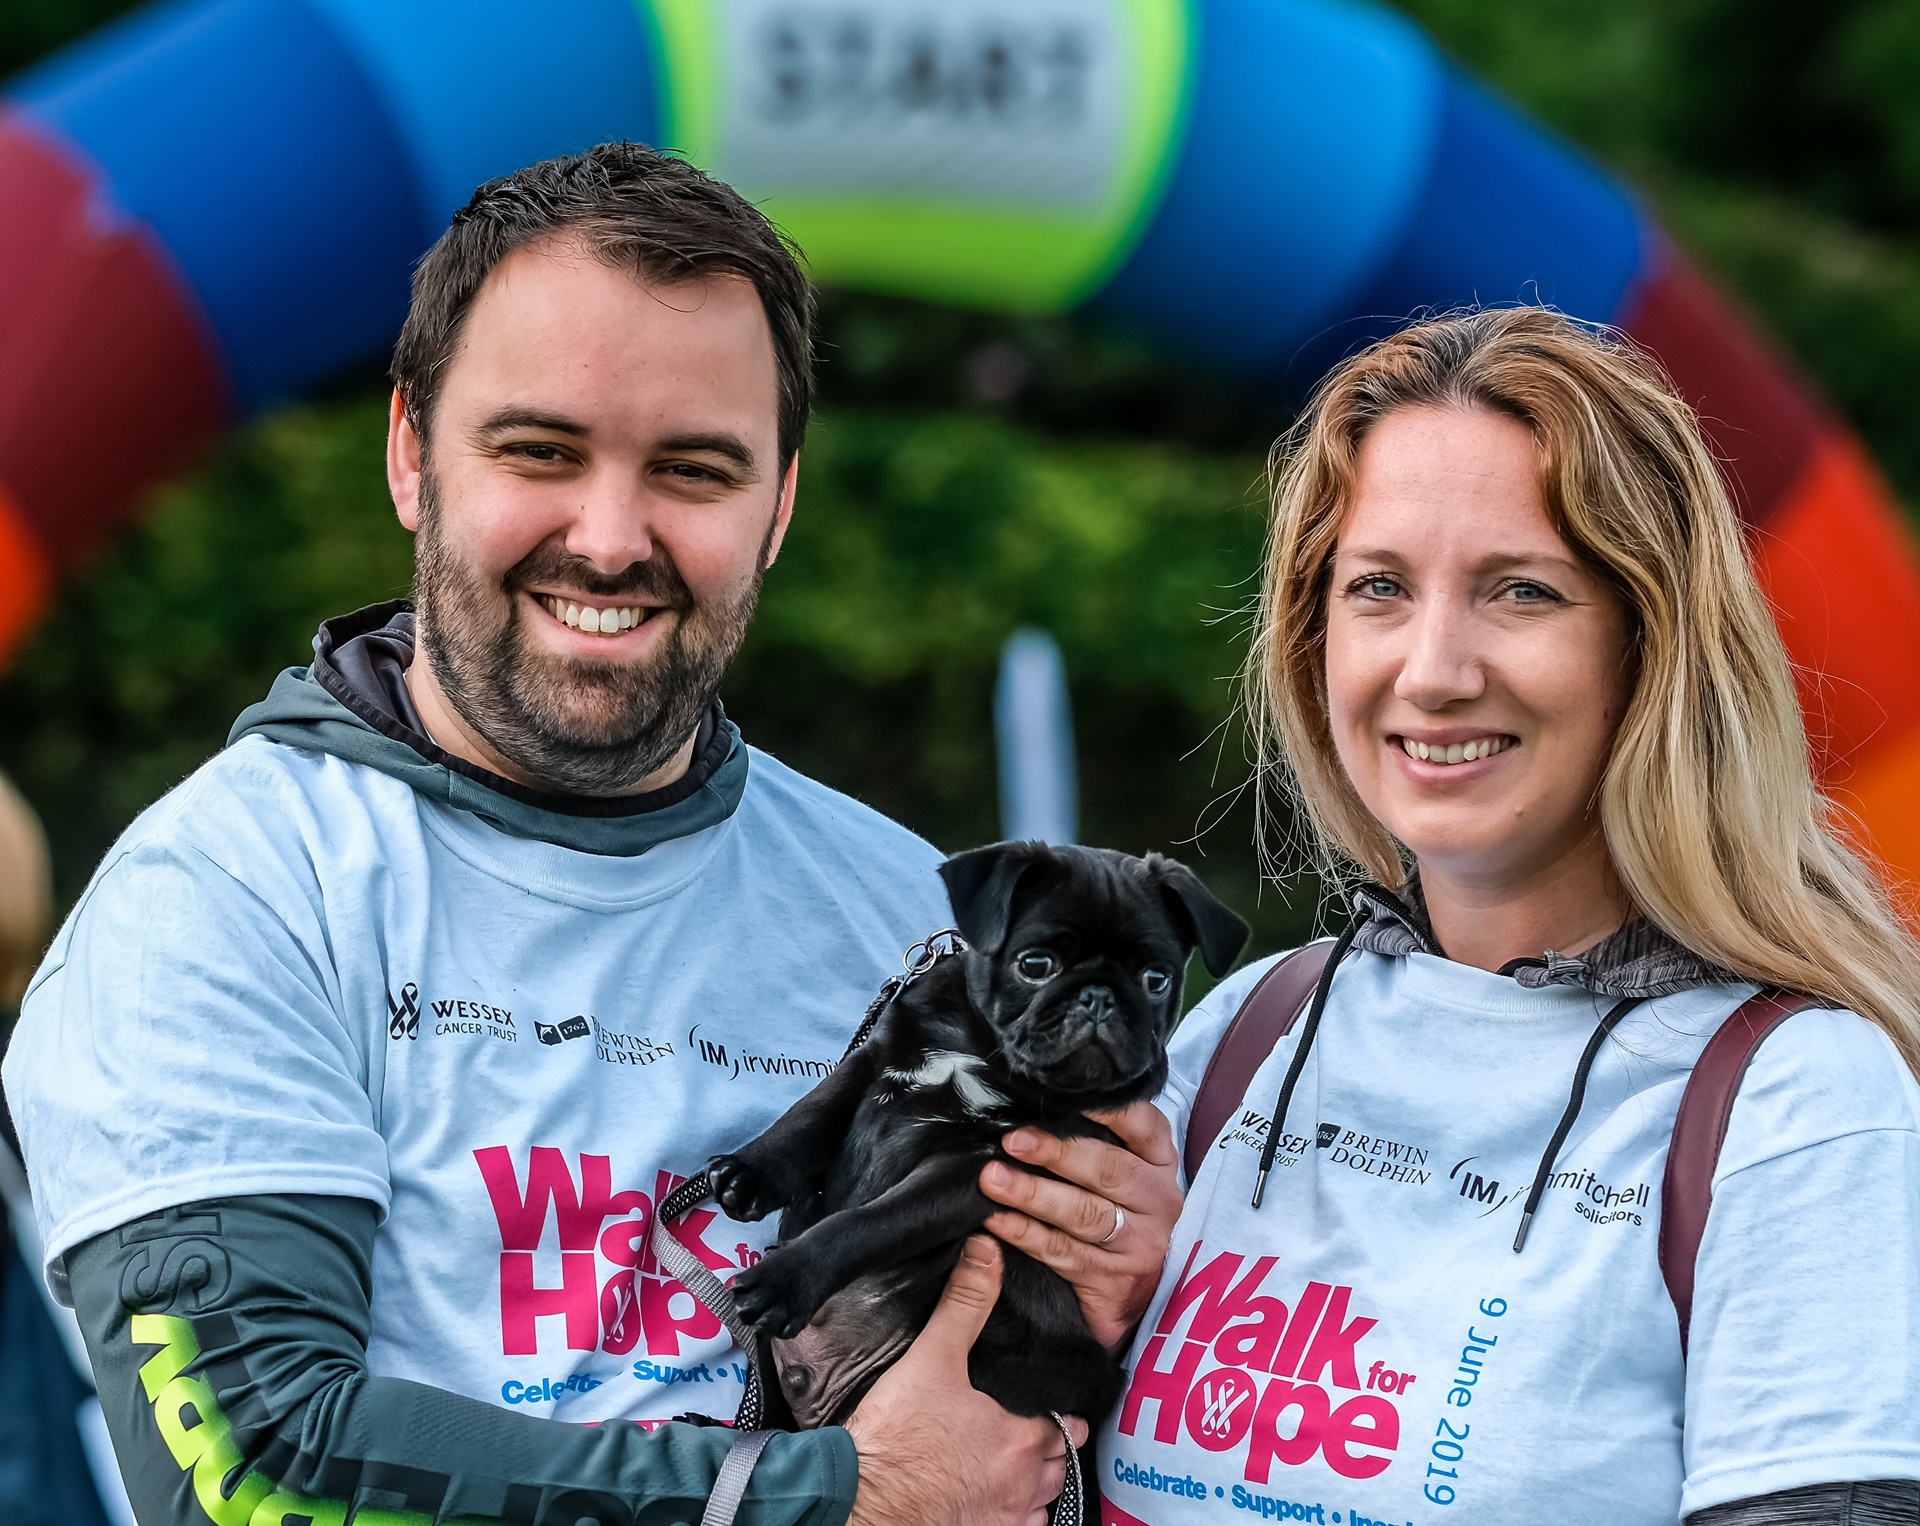 Wessex Cancer Trust - Walk for Hope